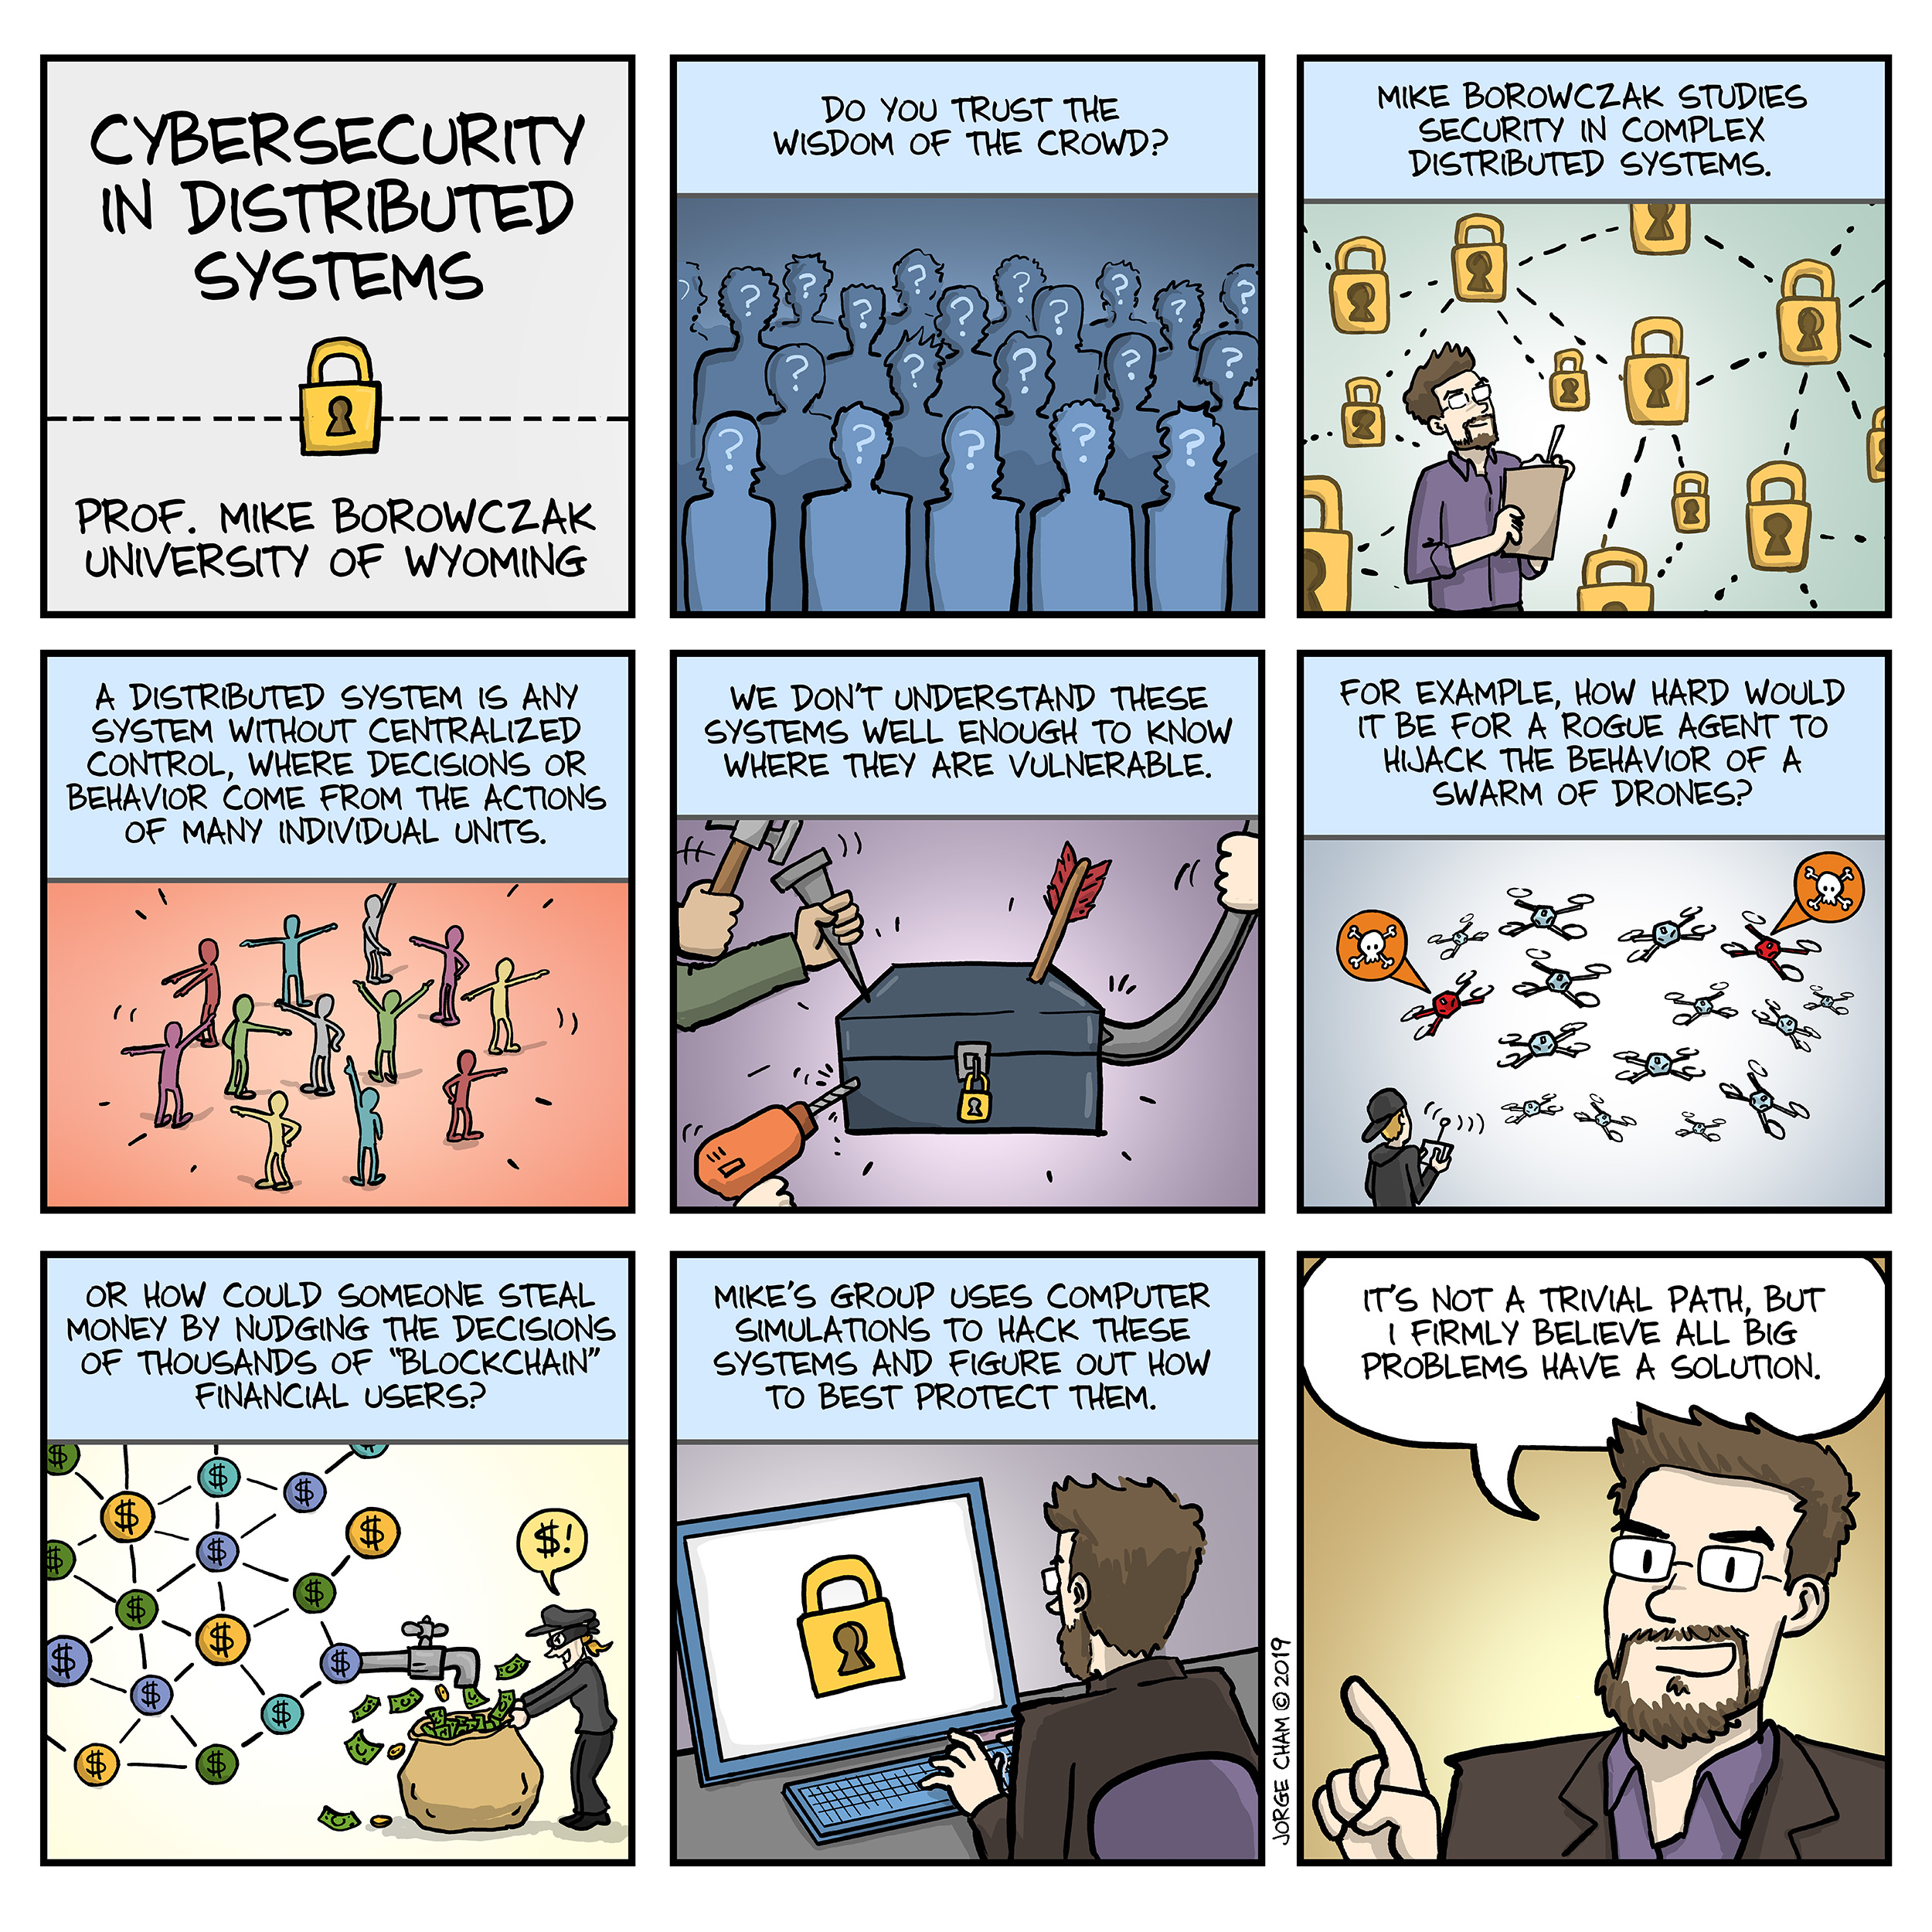 PhD Comic describing Dr. Mike Borowczak's research on security in distributed systems 